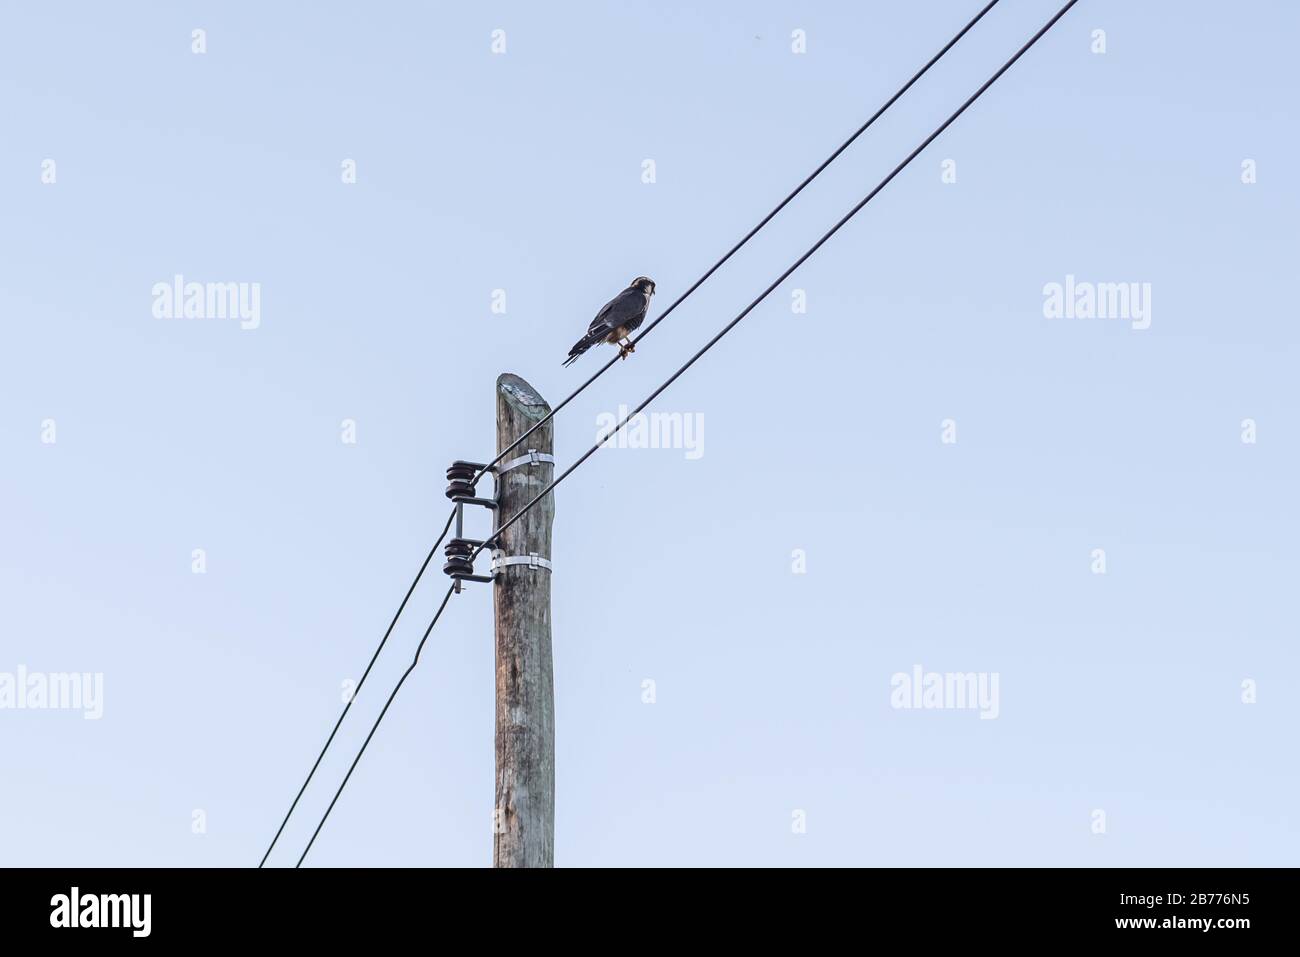 A female hawk standing on an electricity wire watching a male hawk approaching Stock Photo